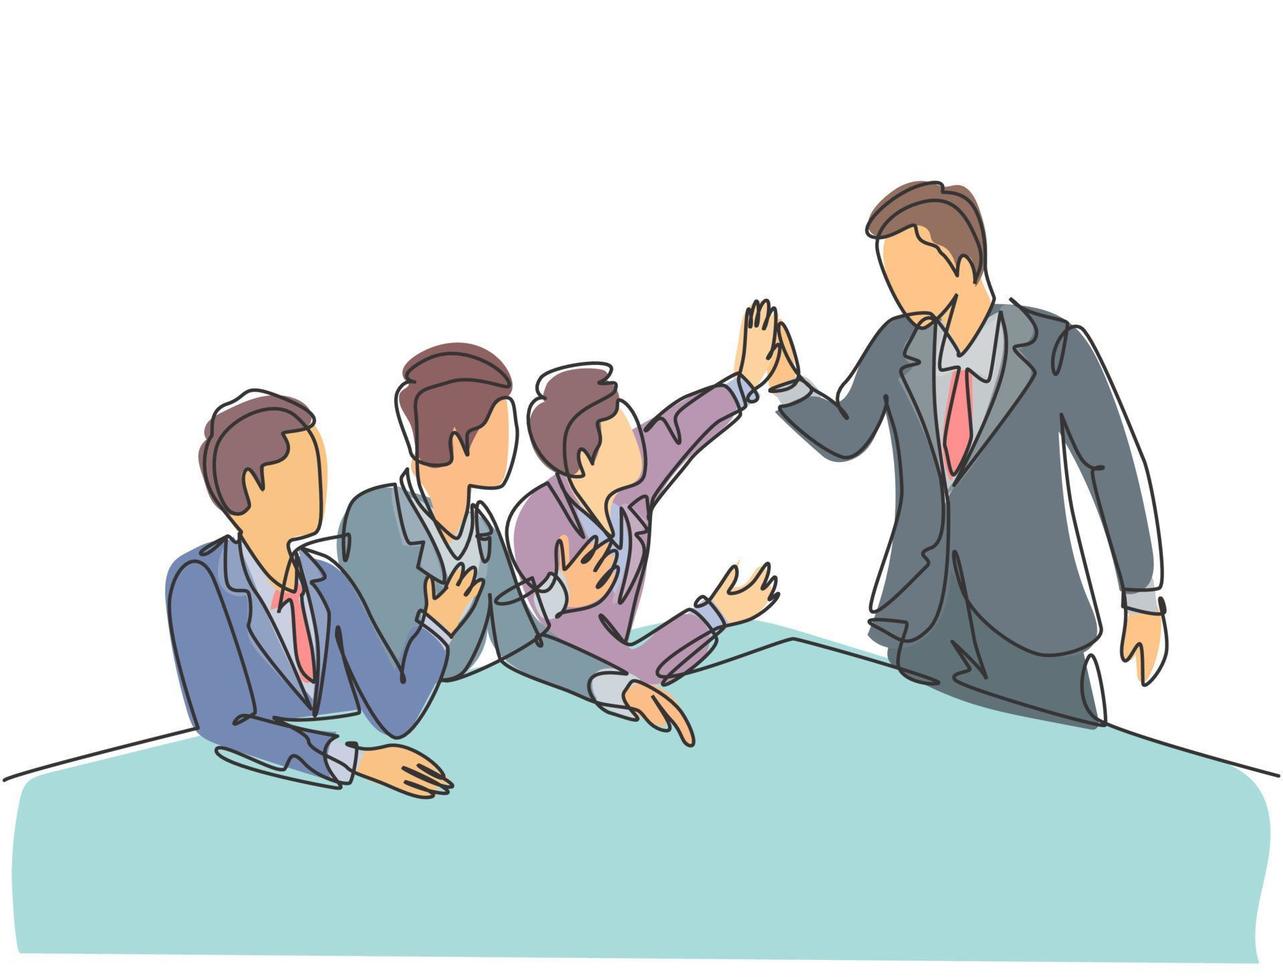 One line drawing group of businessmen celebrating their successive goal at the business meeting with high five gesture. Business deal concept continuous line graphic draw design vector illustration